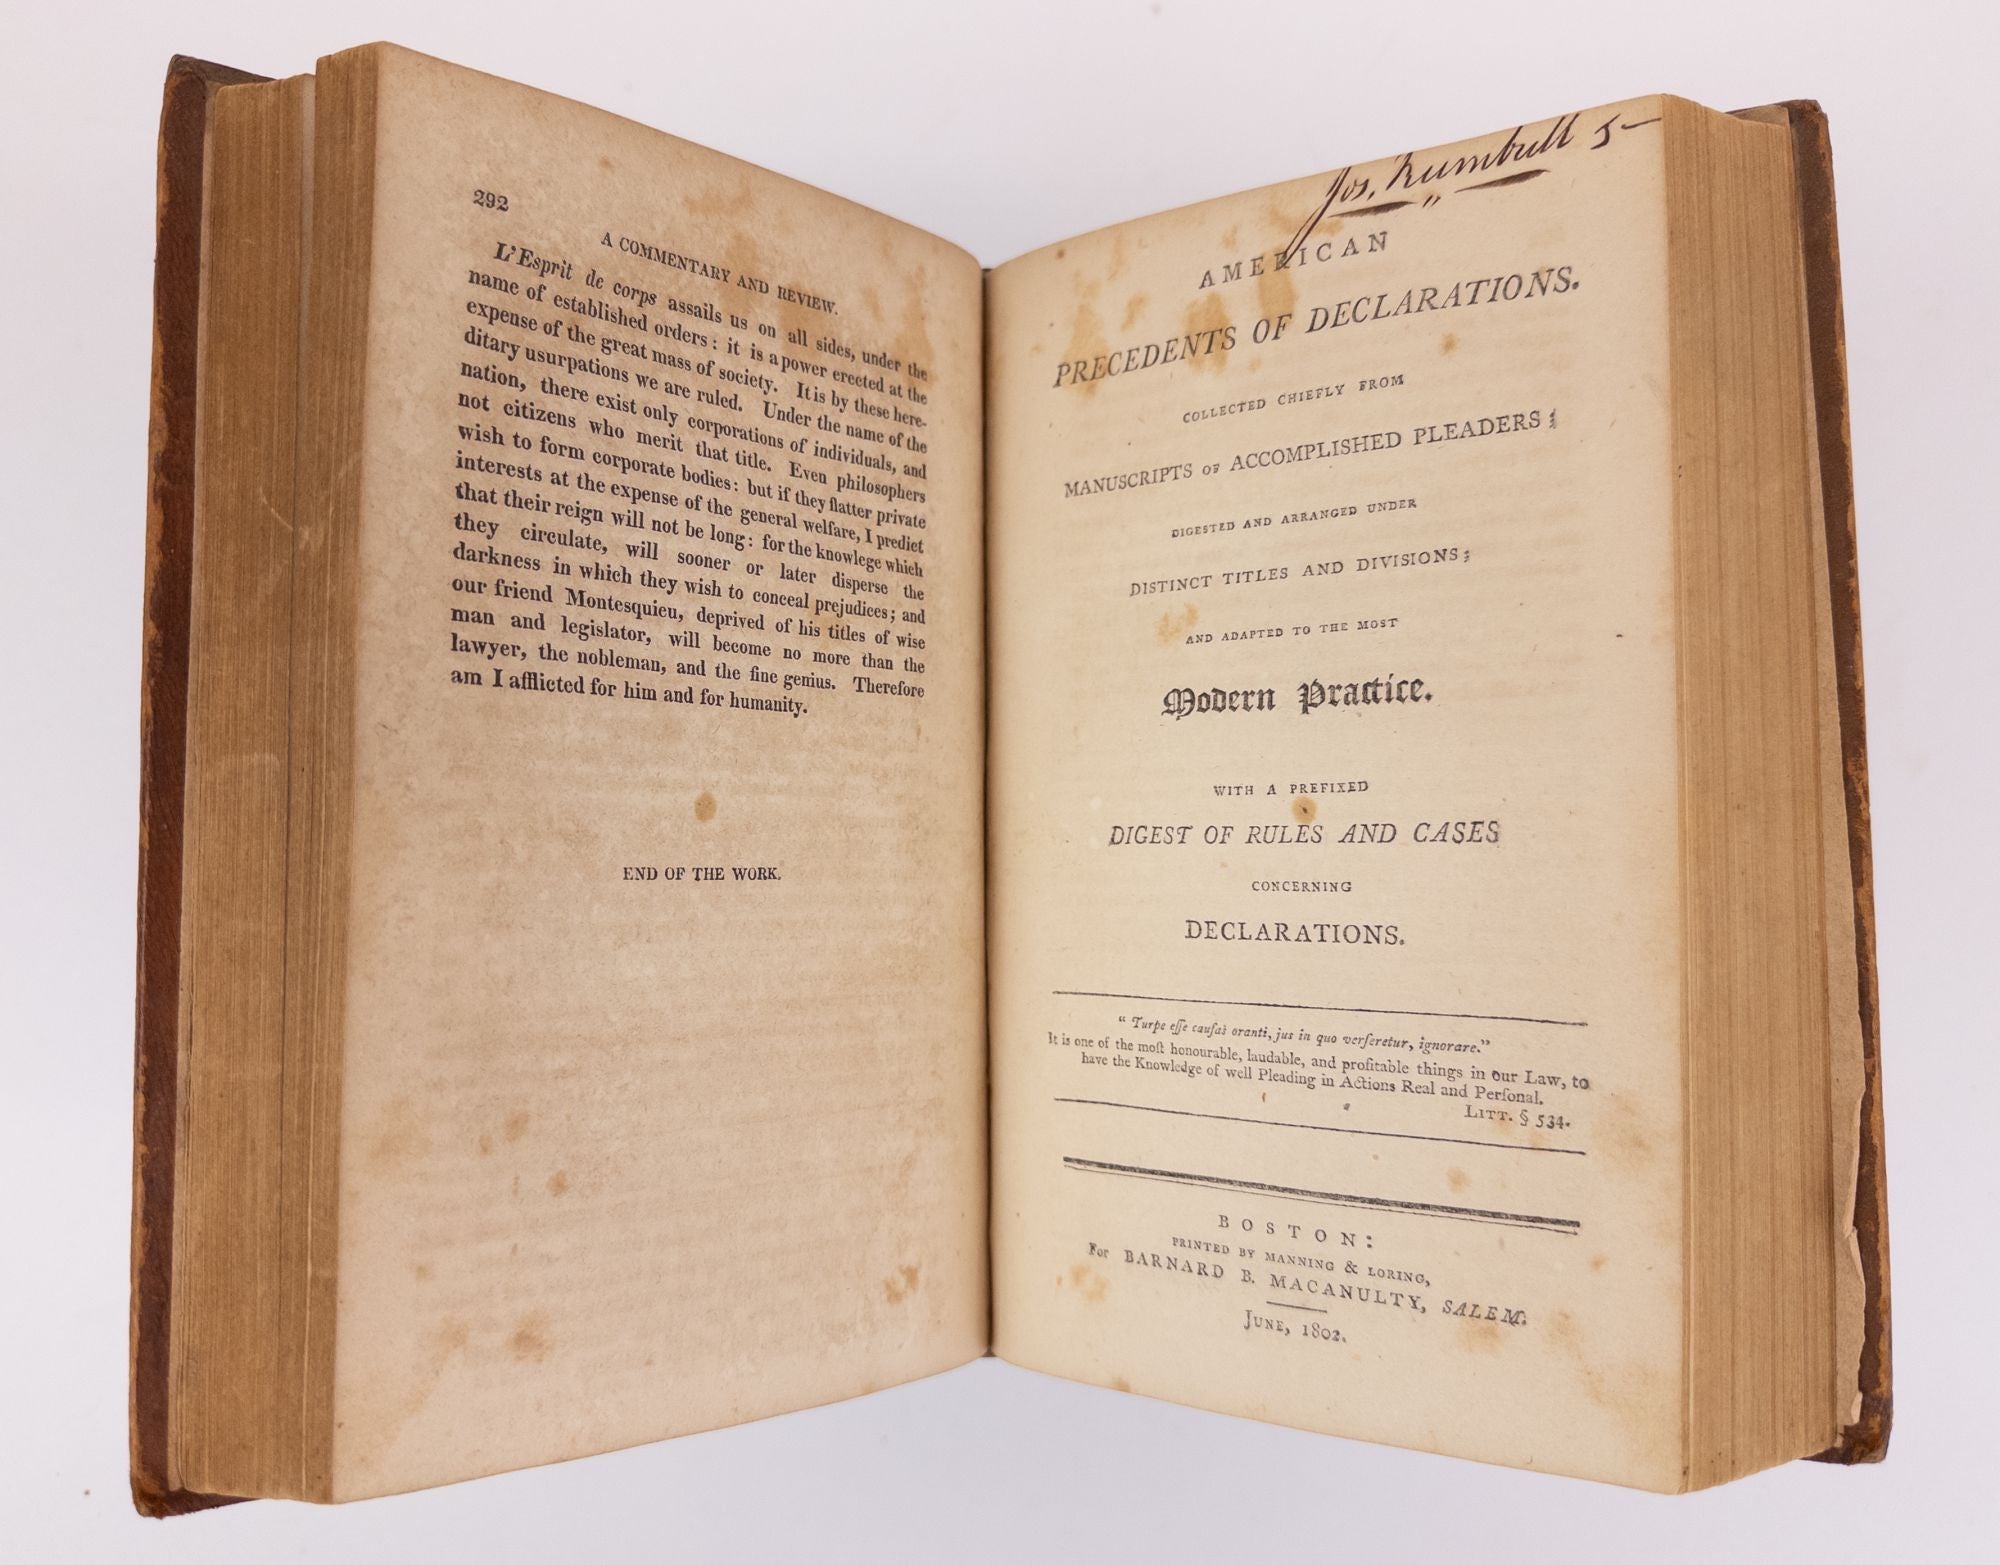 Product Image for A COMMENTARY AND REVIEW OF MONTESQIEU'S SPIRIT OF LAWS. PREPARED FOR PRESS FROM THE ORIGINAL MANUSCRIPT, IN THE HANDS OF THE PUBLISHER. TO WHICH ARE ANNEXED, OBSERVATIONS ON THE THIRTY-FIRST BOOK, BY THE LATE M. CONDORCET: AND TWO LETERS OF HELVETIUS, ON 